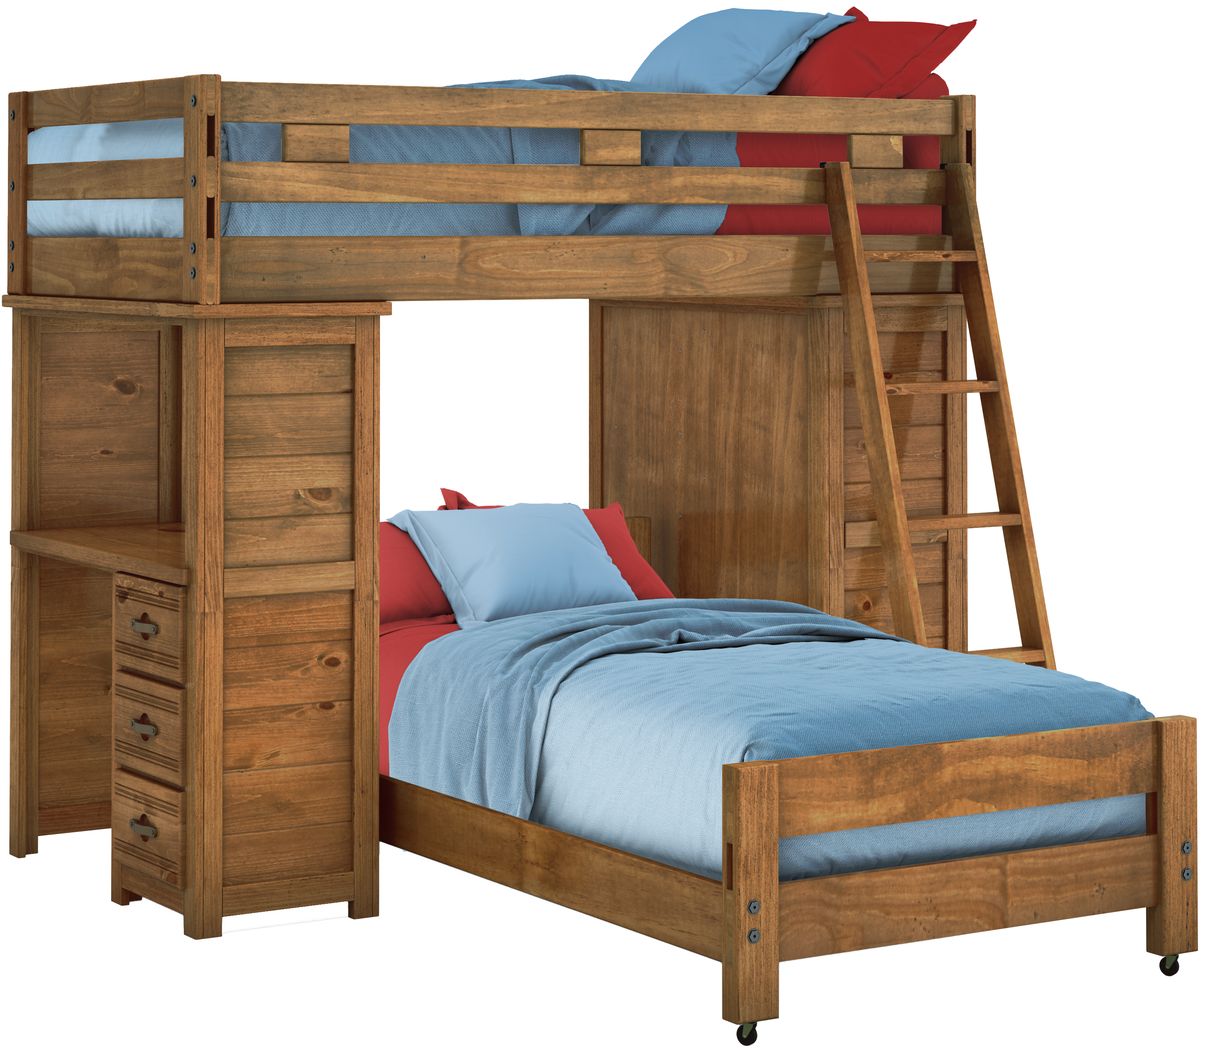 Creekside Furniture Collection Bunk, Creekside Twin Full Bunk Bed